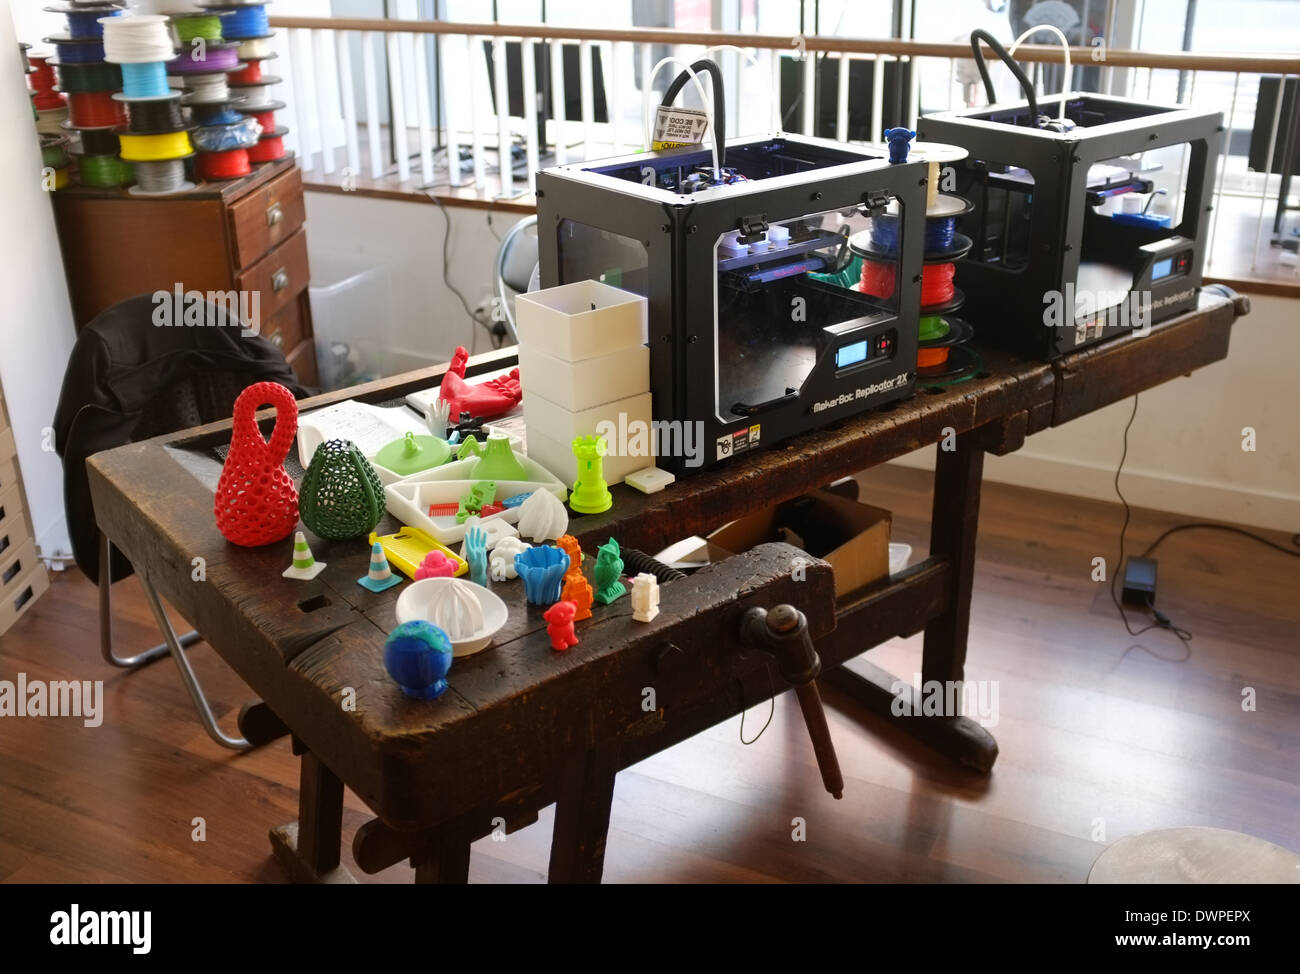 A selection of 3D printed objects and 2 3D printers at the iMakr 3D printing store, 79 Clerkenwell Road London EC1R 5AR UK Stock Photo